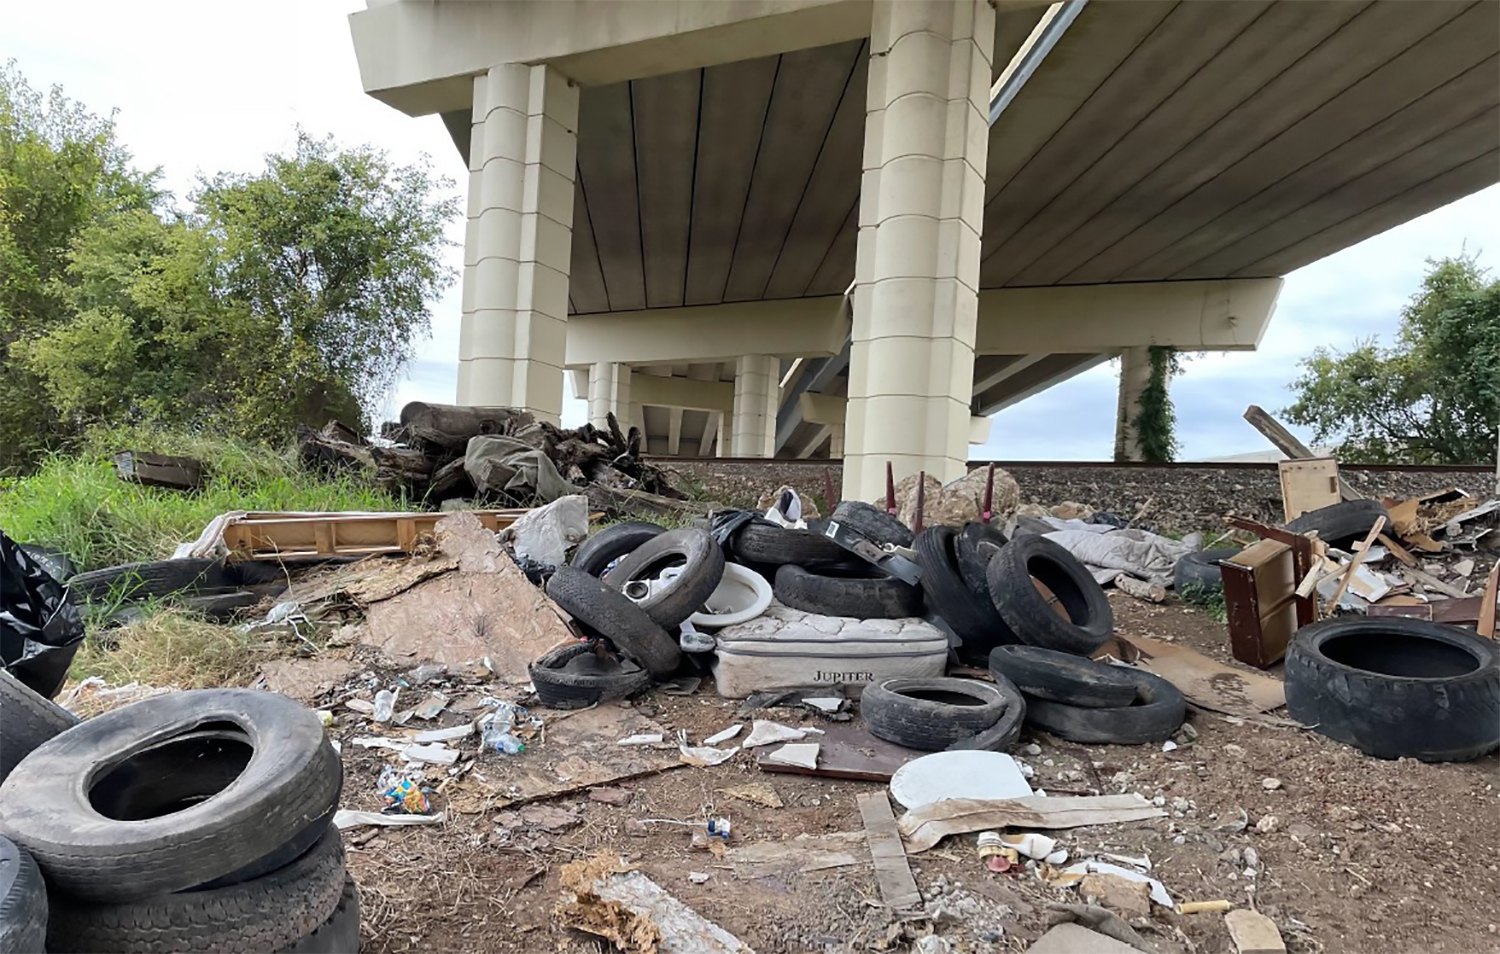 Tires, mattresses and trash under a bridge in Houston, Texas